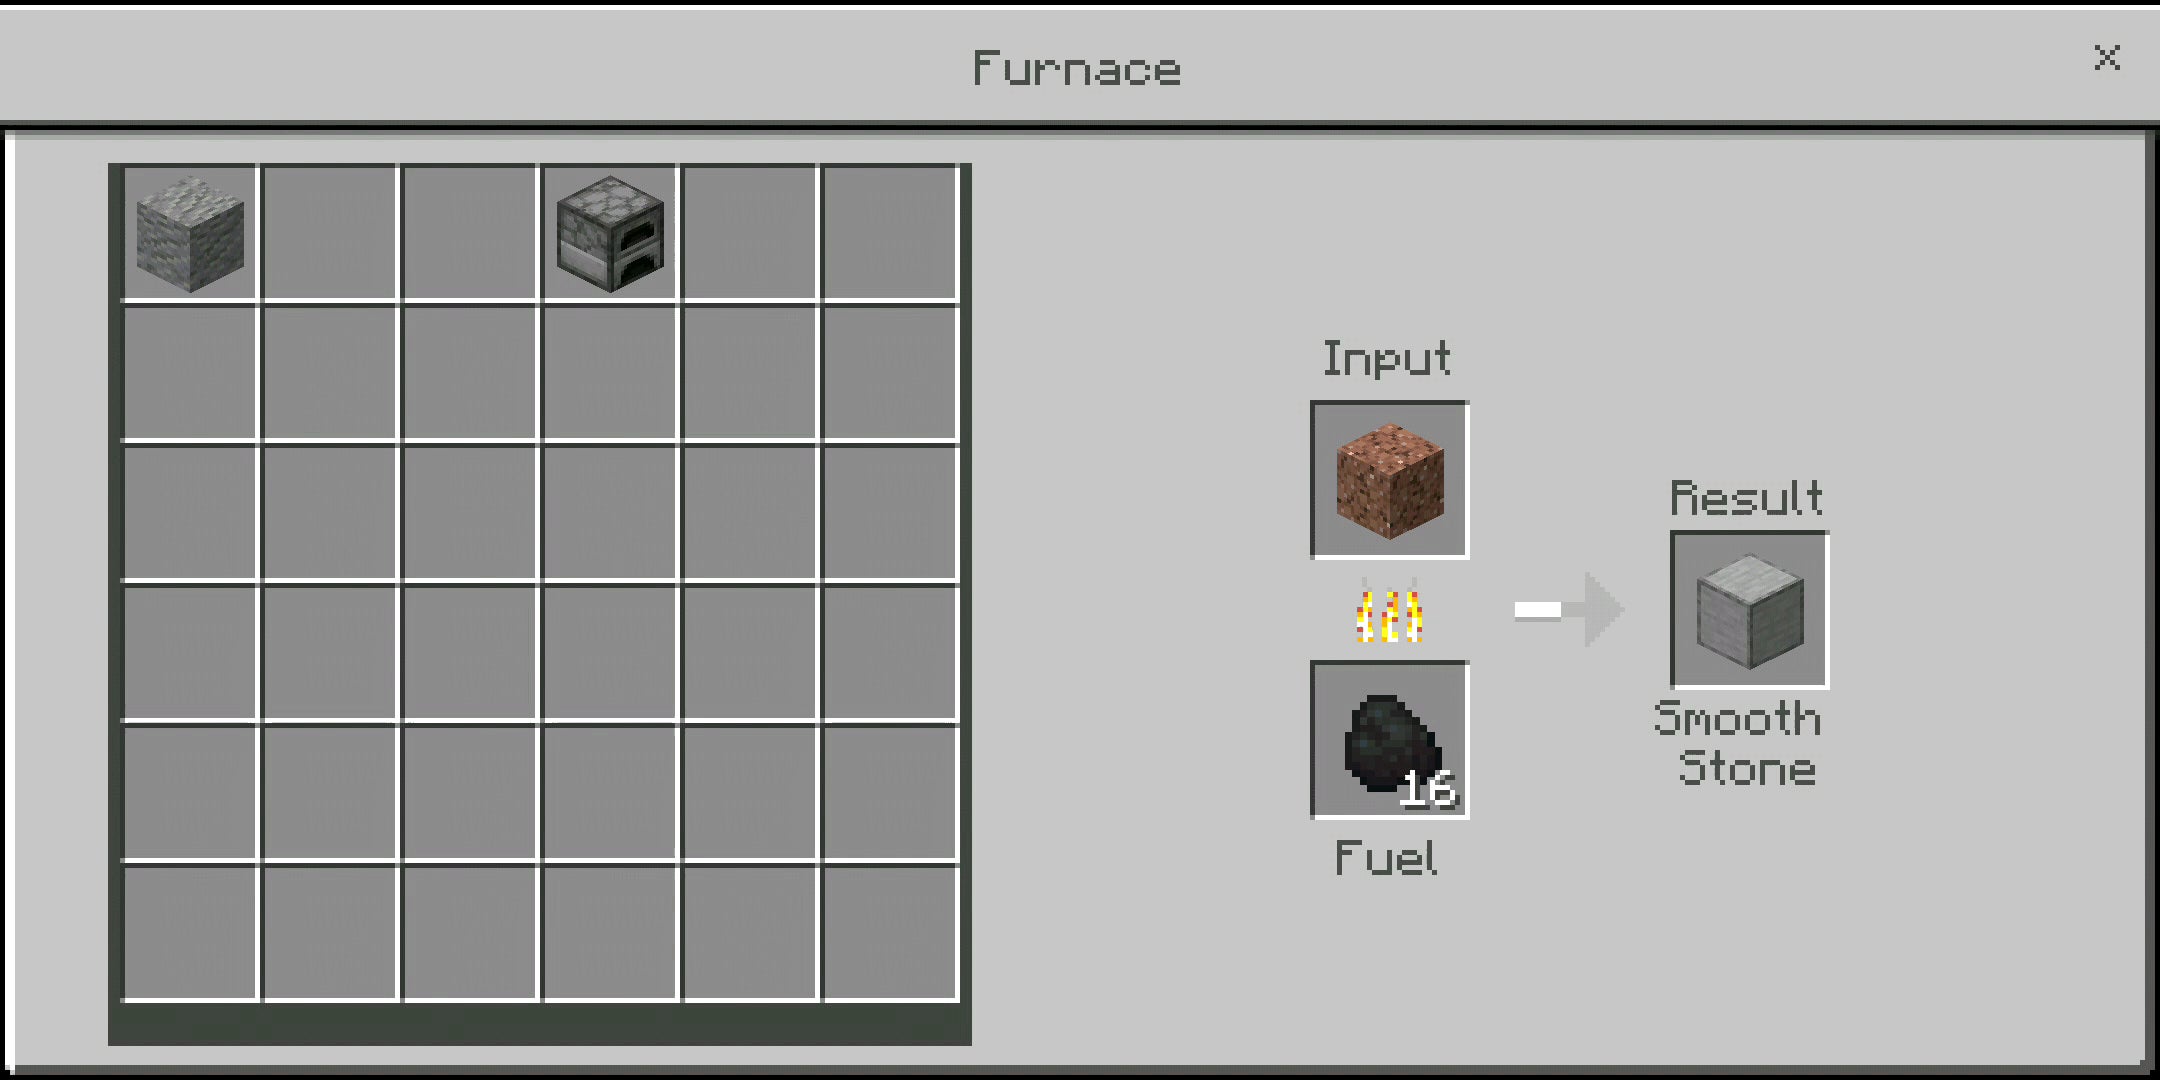 Making Smooth Stone in the Furnace in Minecraft